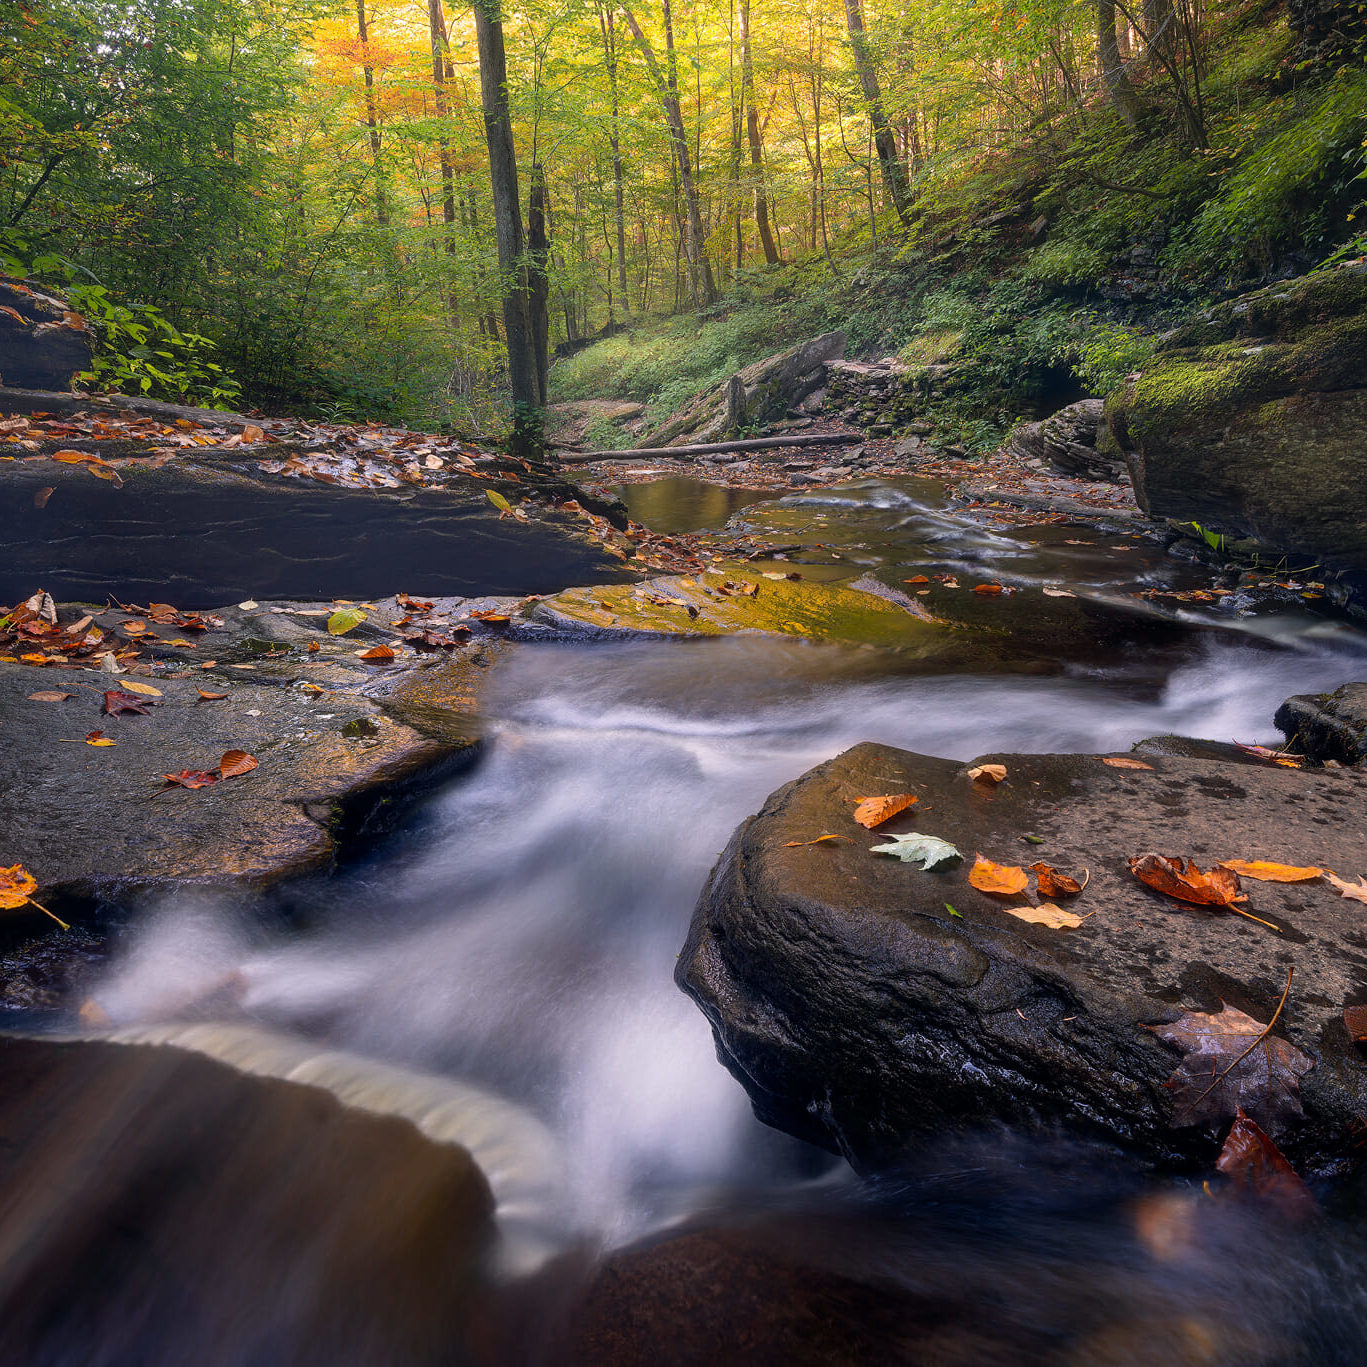 One of the many cascades of Ricketts Glen State Park cascades over the rocky gorge as the sun glows through the foliage beyond.